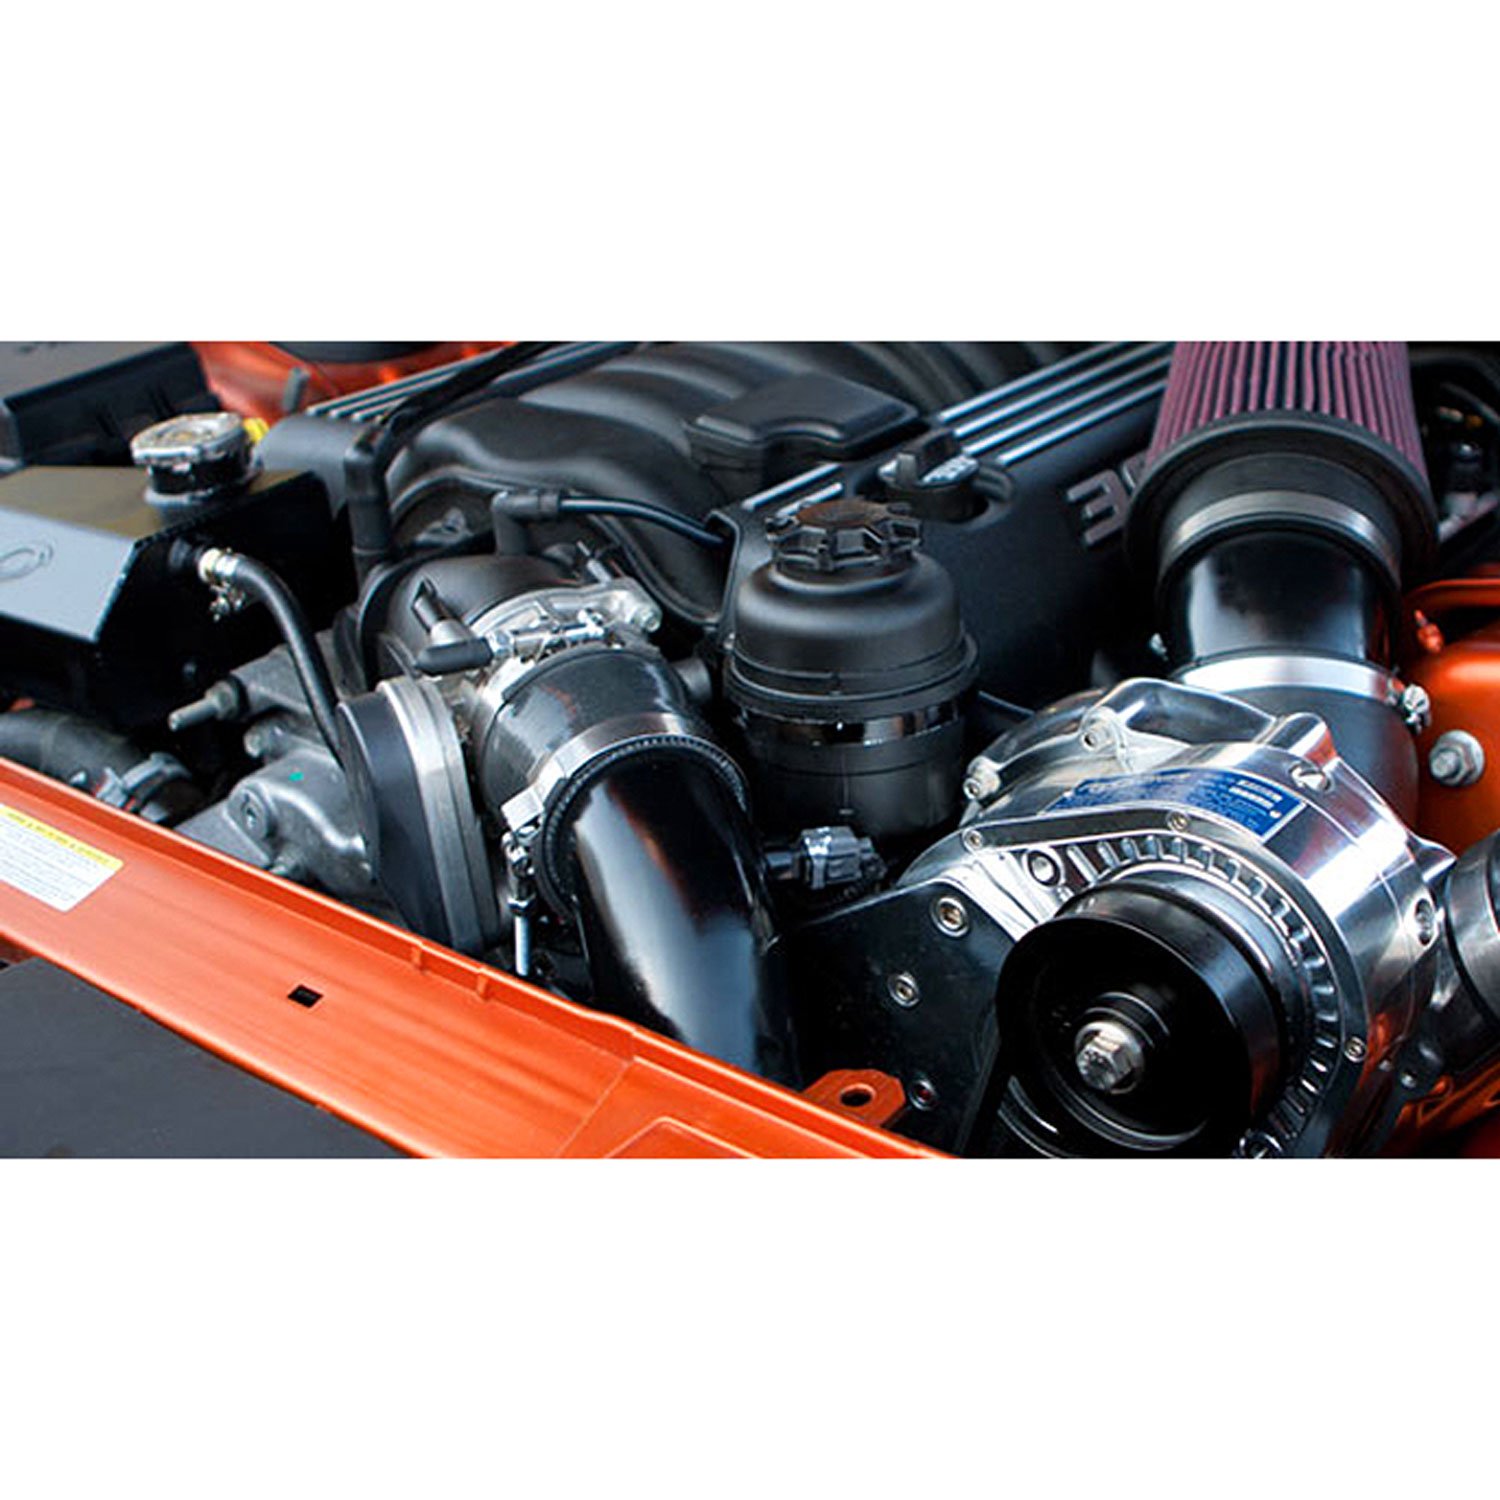 High Output Intercooled Supercharger System P-1X Dodge Challenger 6.4L Hemi Manual